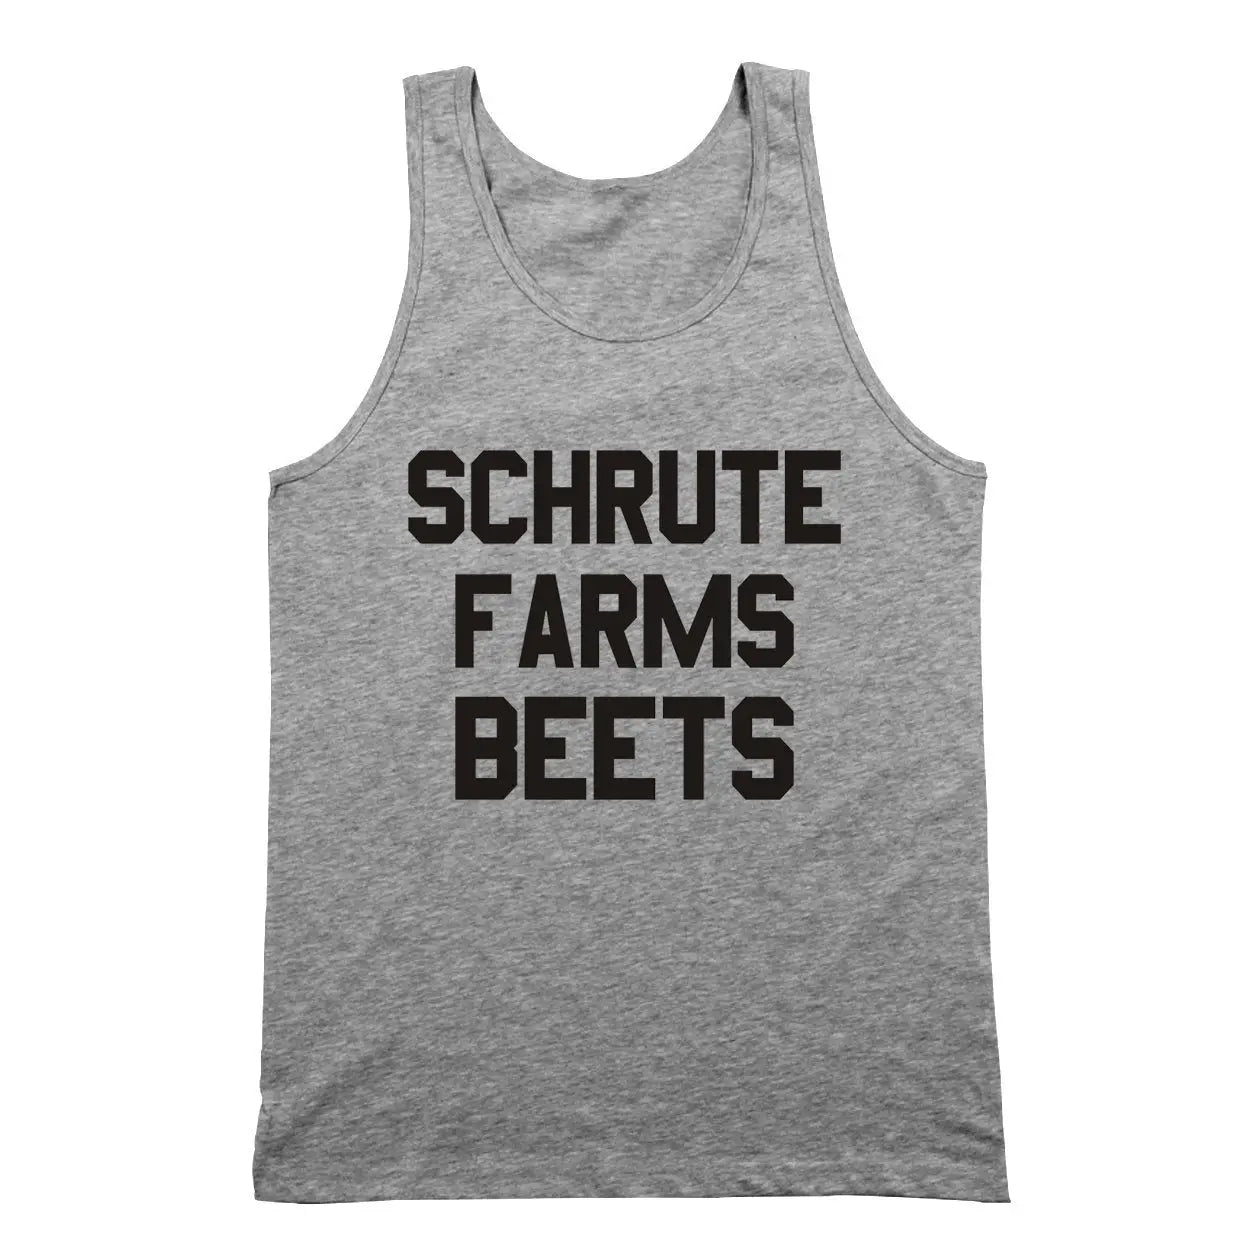 Schrute Farms Beets Tshirt - Donkey Tees